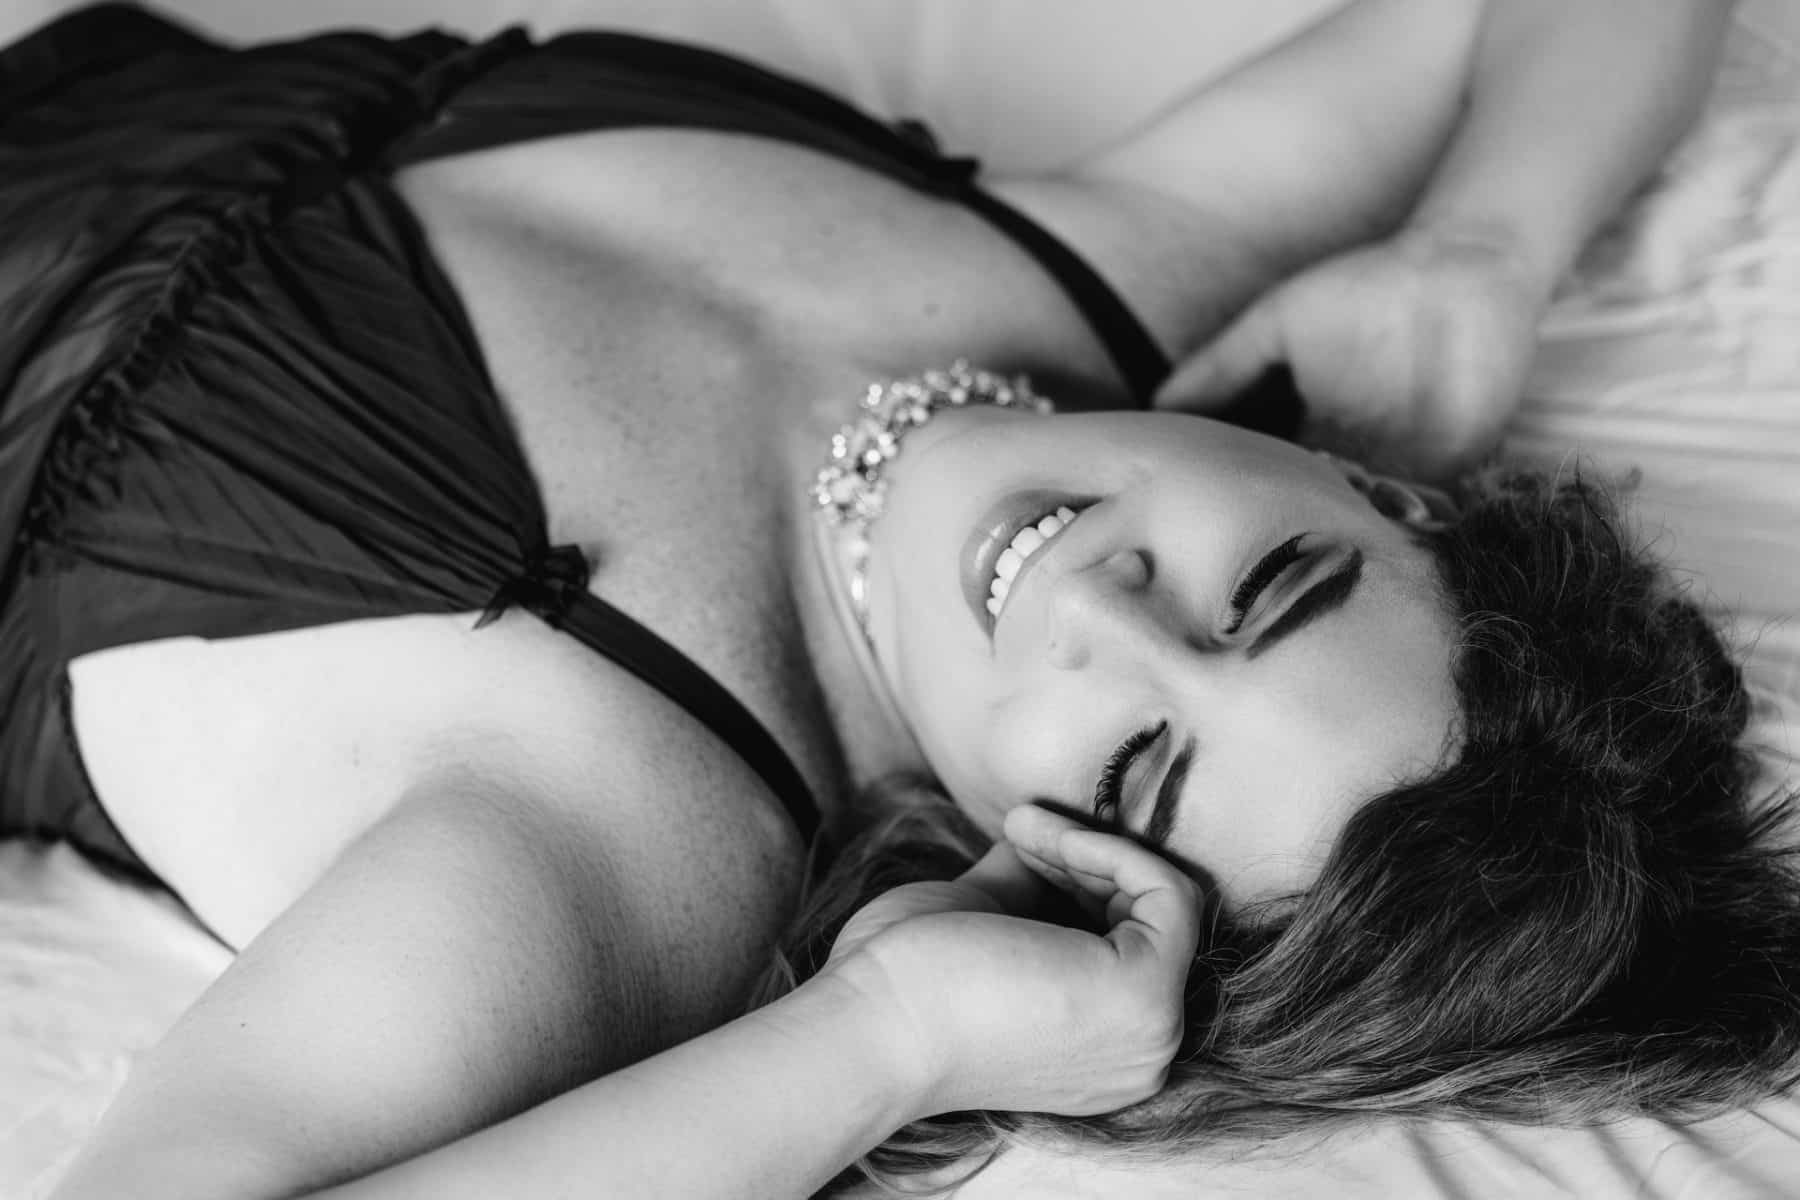 Let your story shine through our gender confirming boudoir photography tailored to honor your individuality. Explore our LGBTQAI+ inclusive sessions and reserve your spot today!